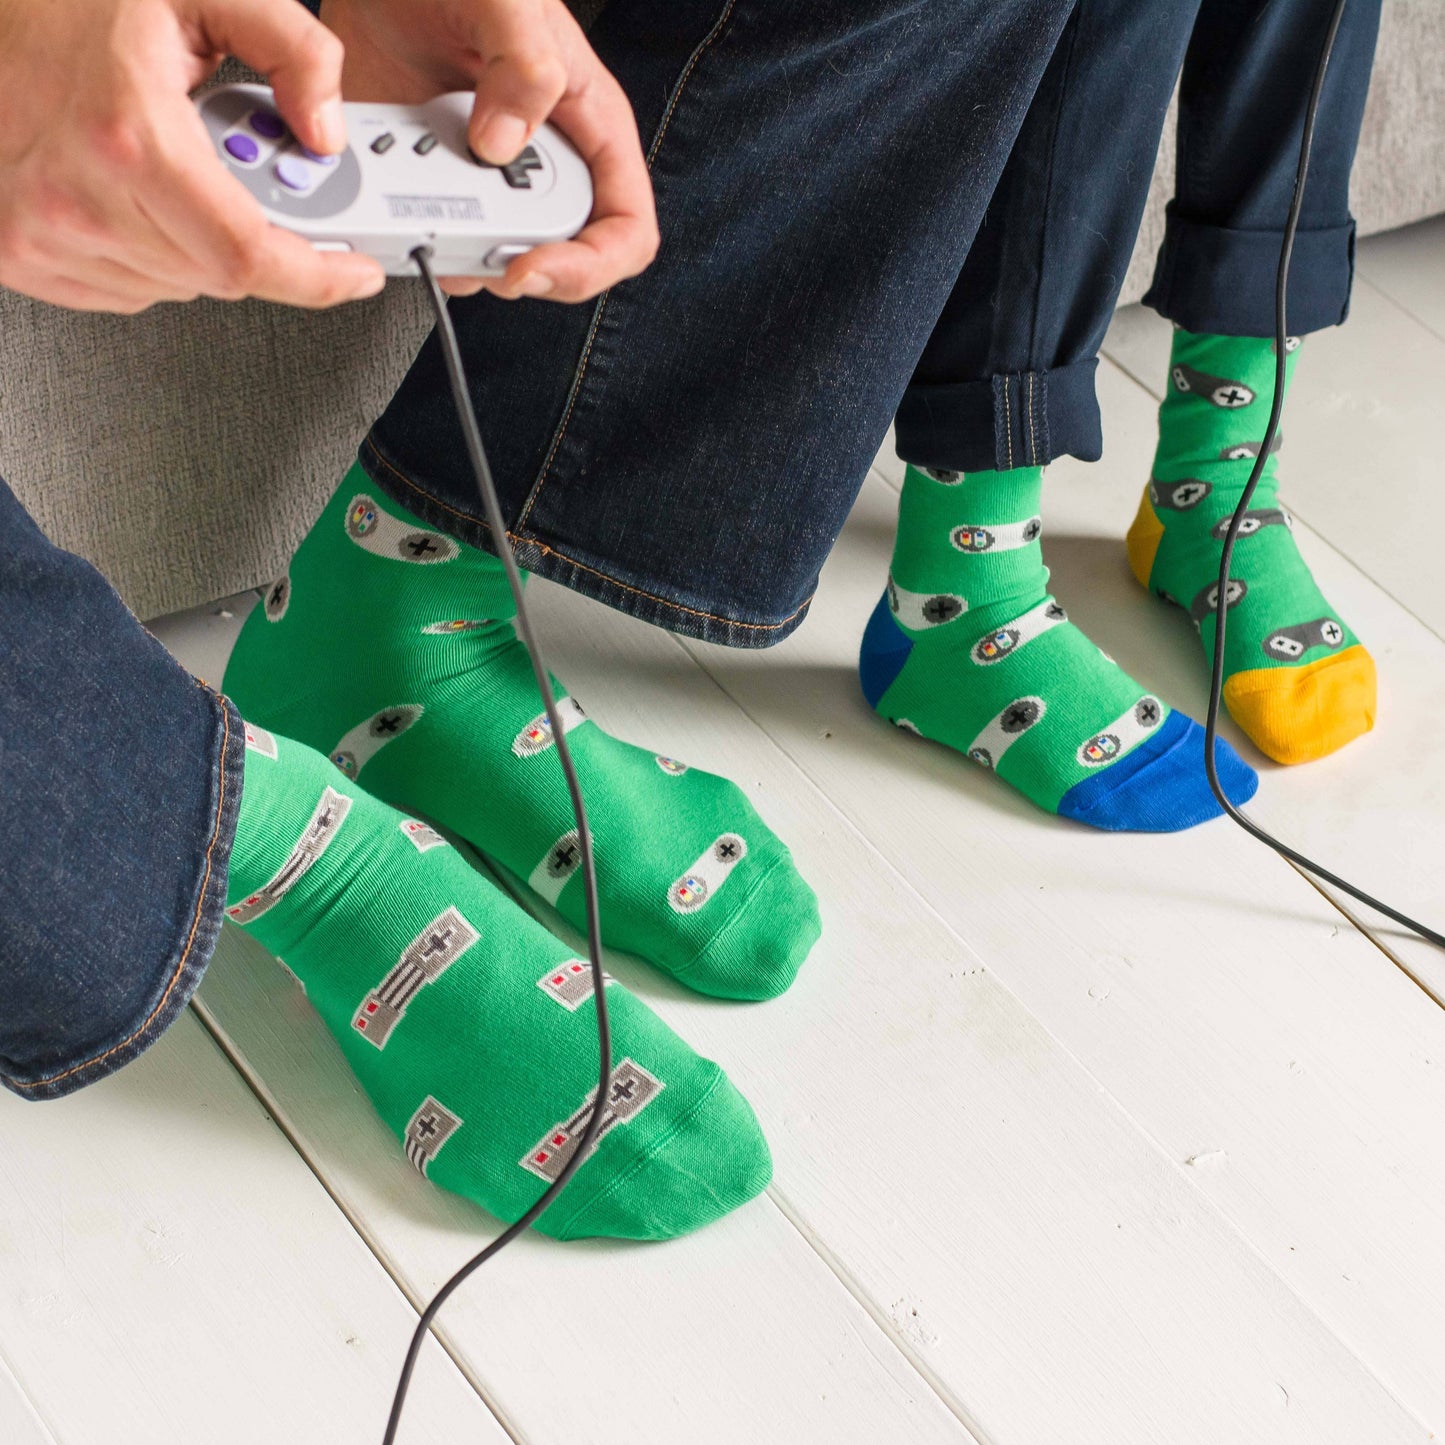 Men’s Socks | Video Game Controllers | Mismatched